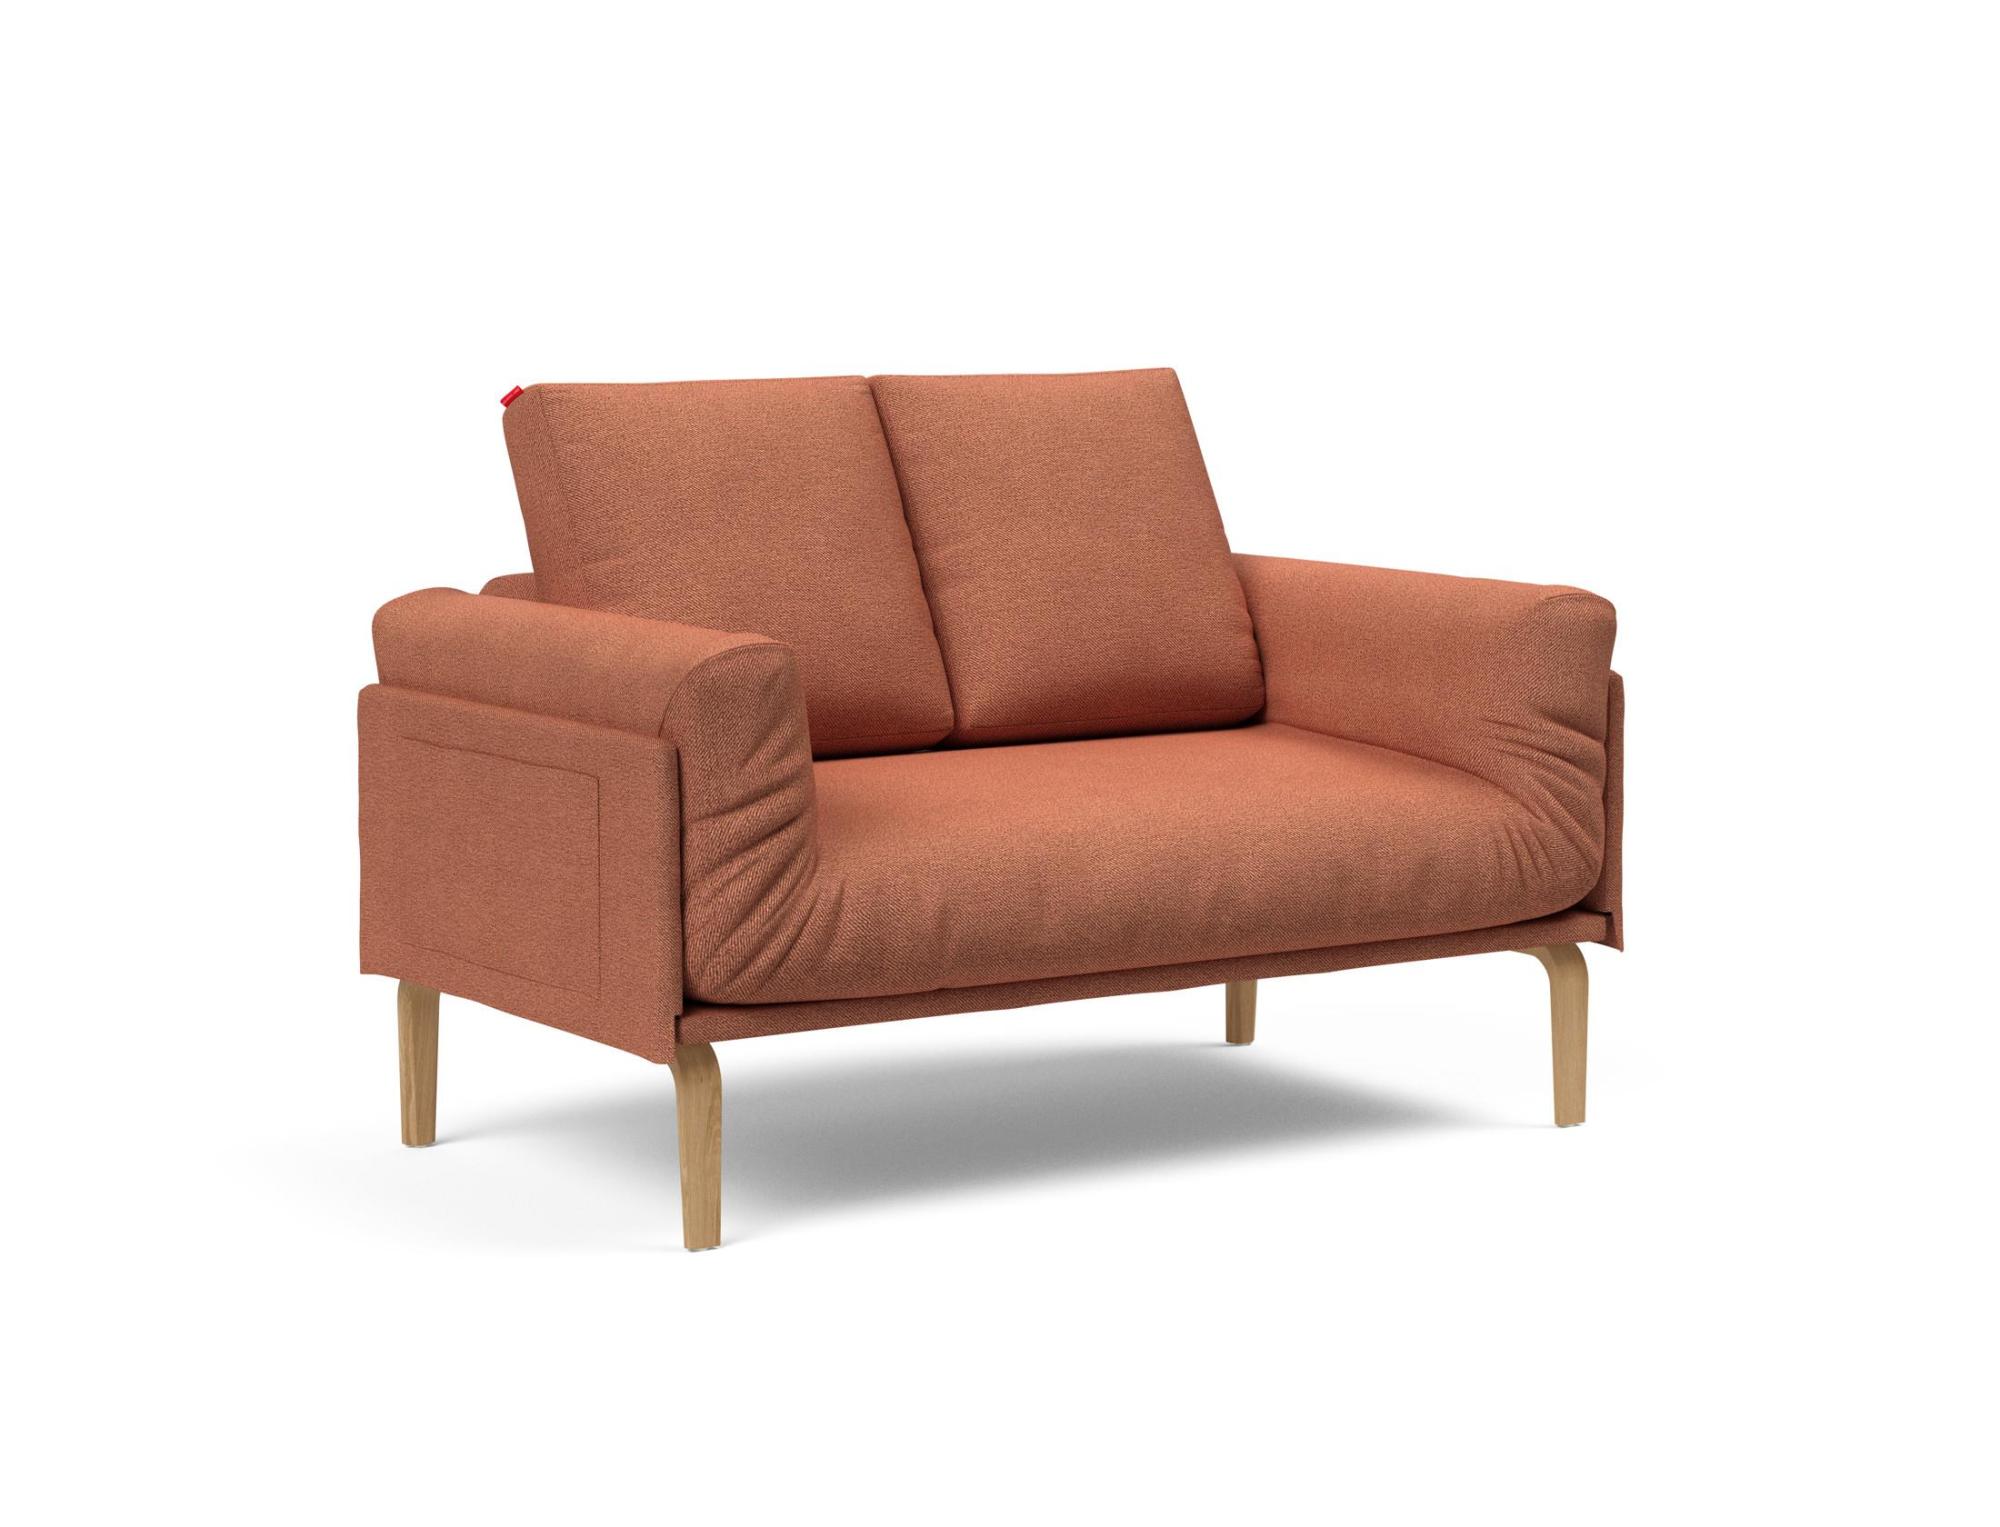 Liege/Daybed Liege/Daybed Rollo - Innovation Sofas